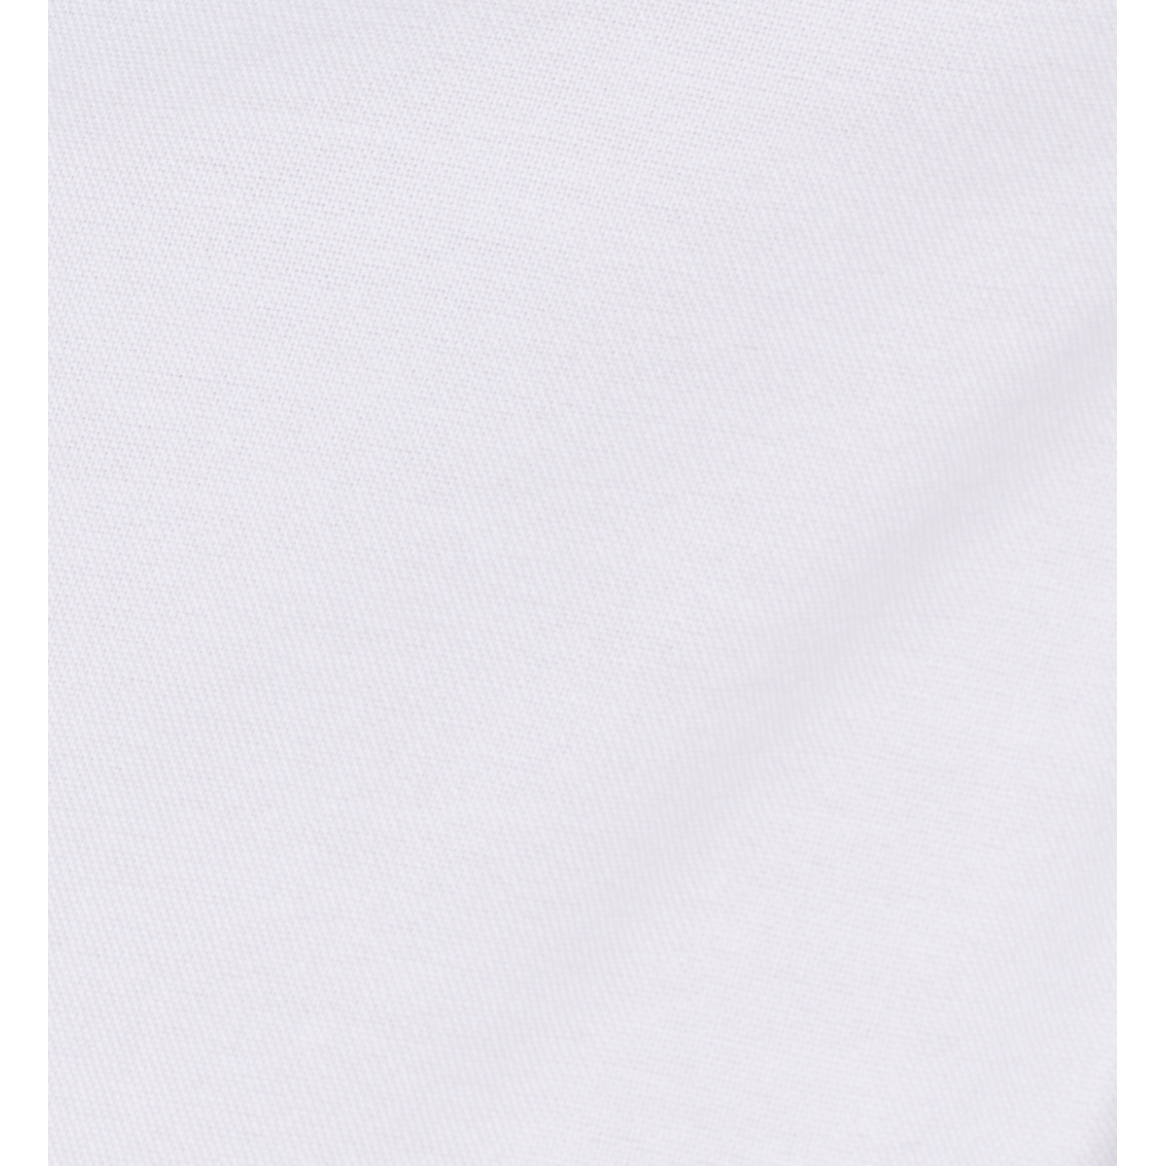 Chemise oxford blanche coupe droite manches courtes